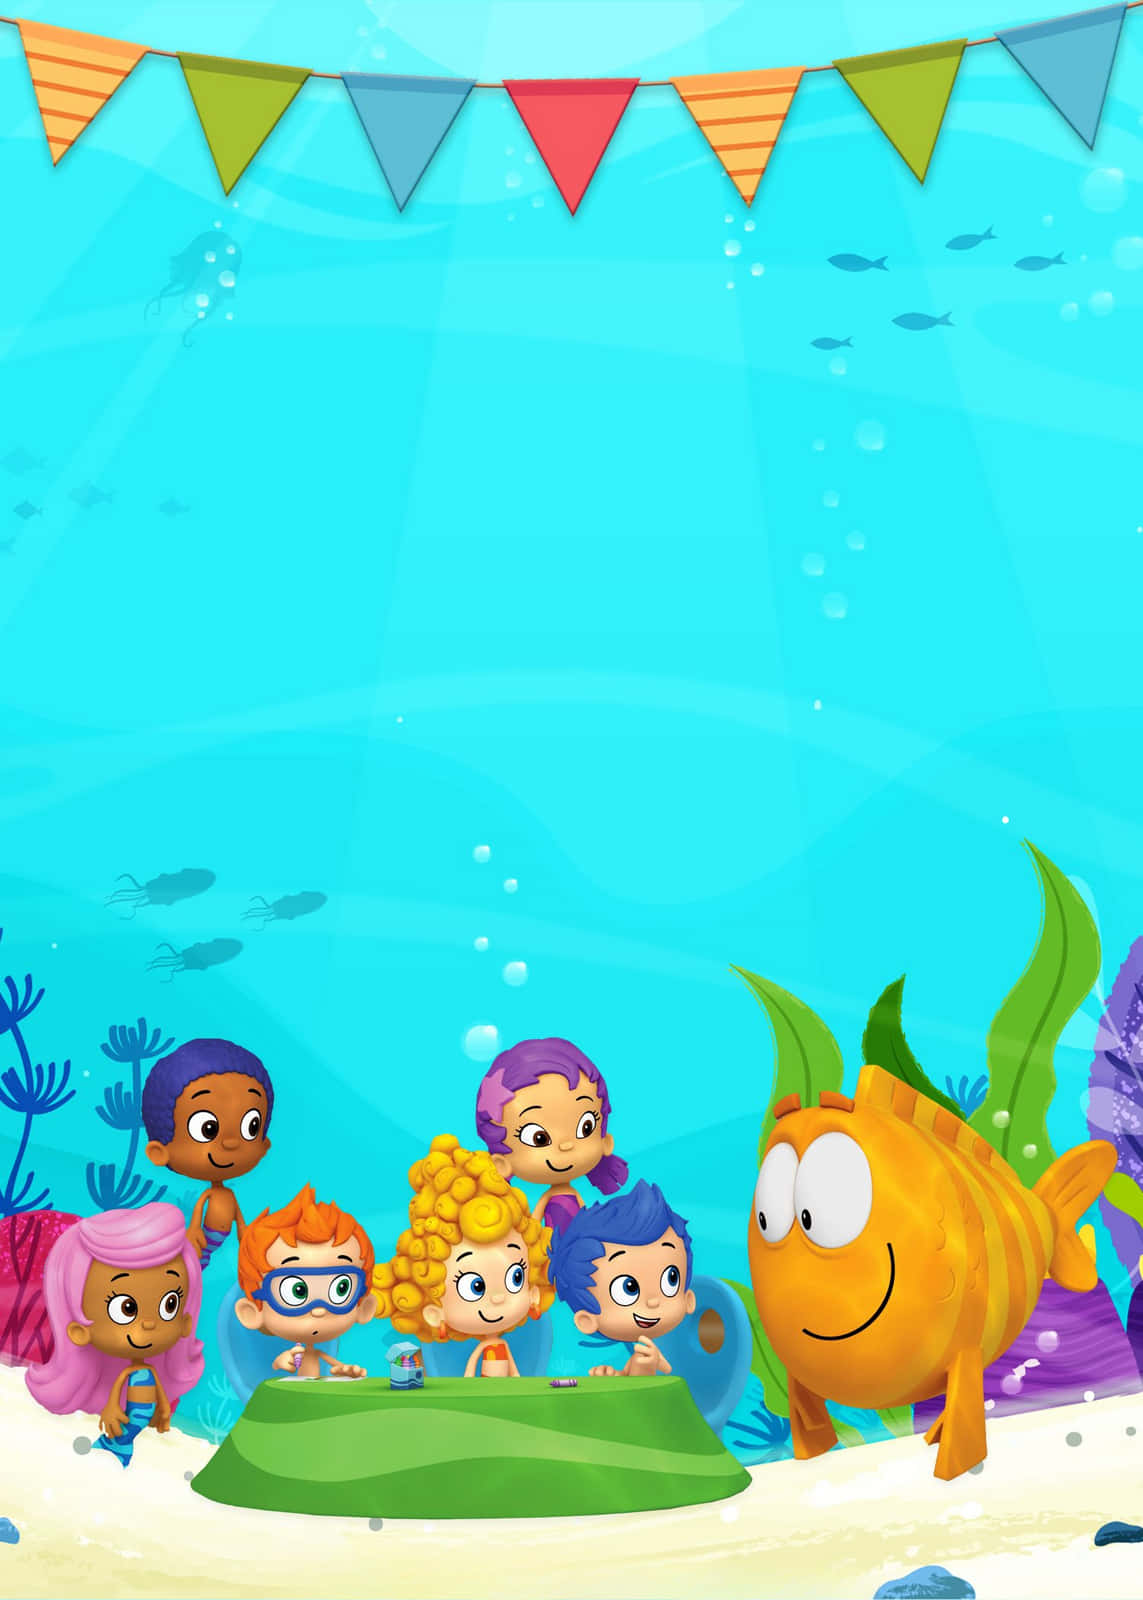 Good times ahead with Bubble Guppies!